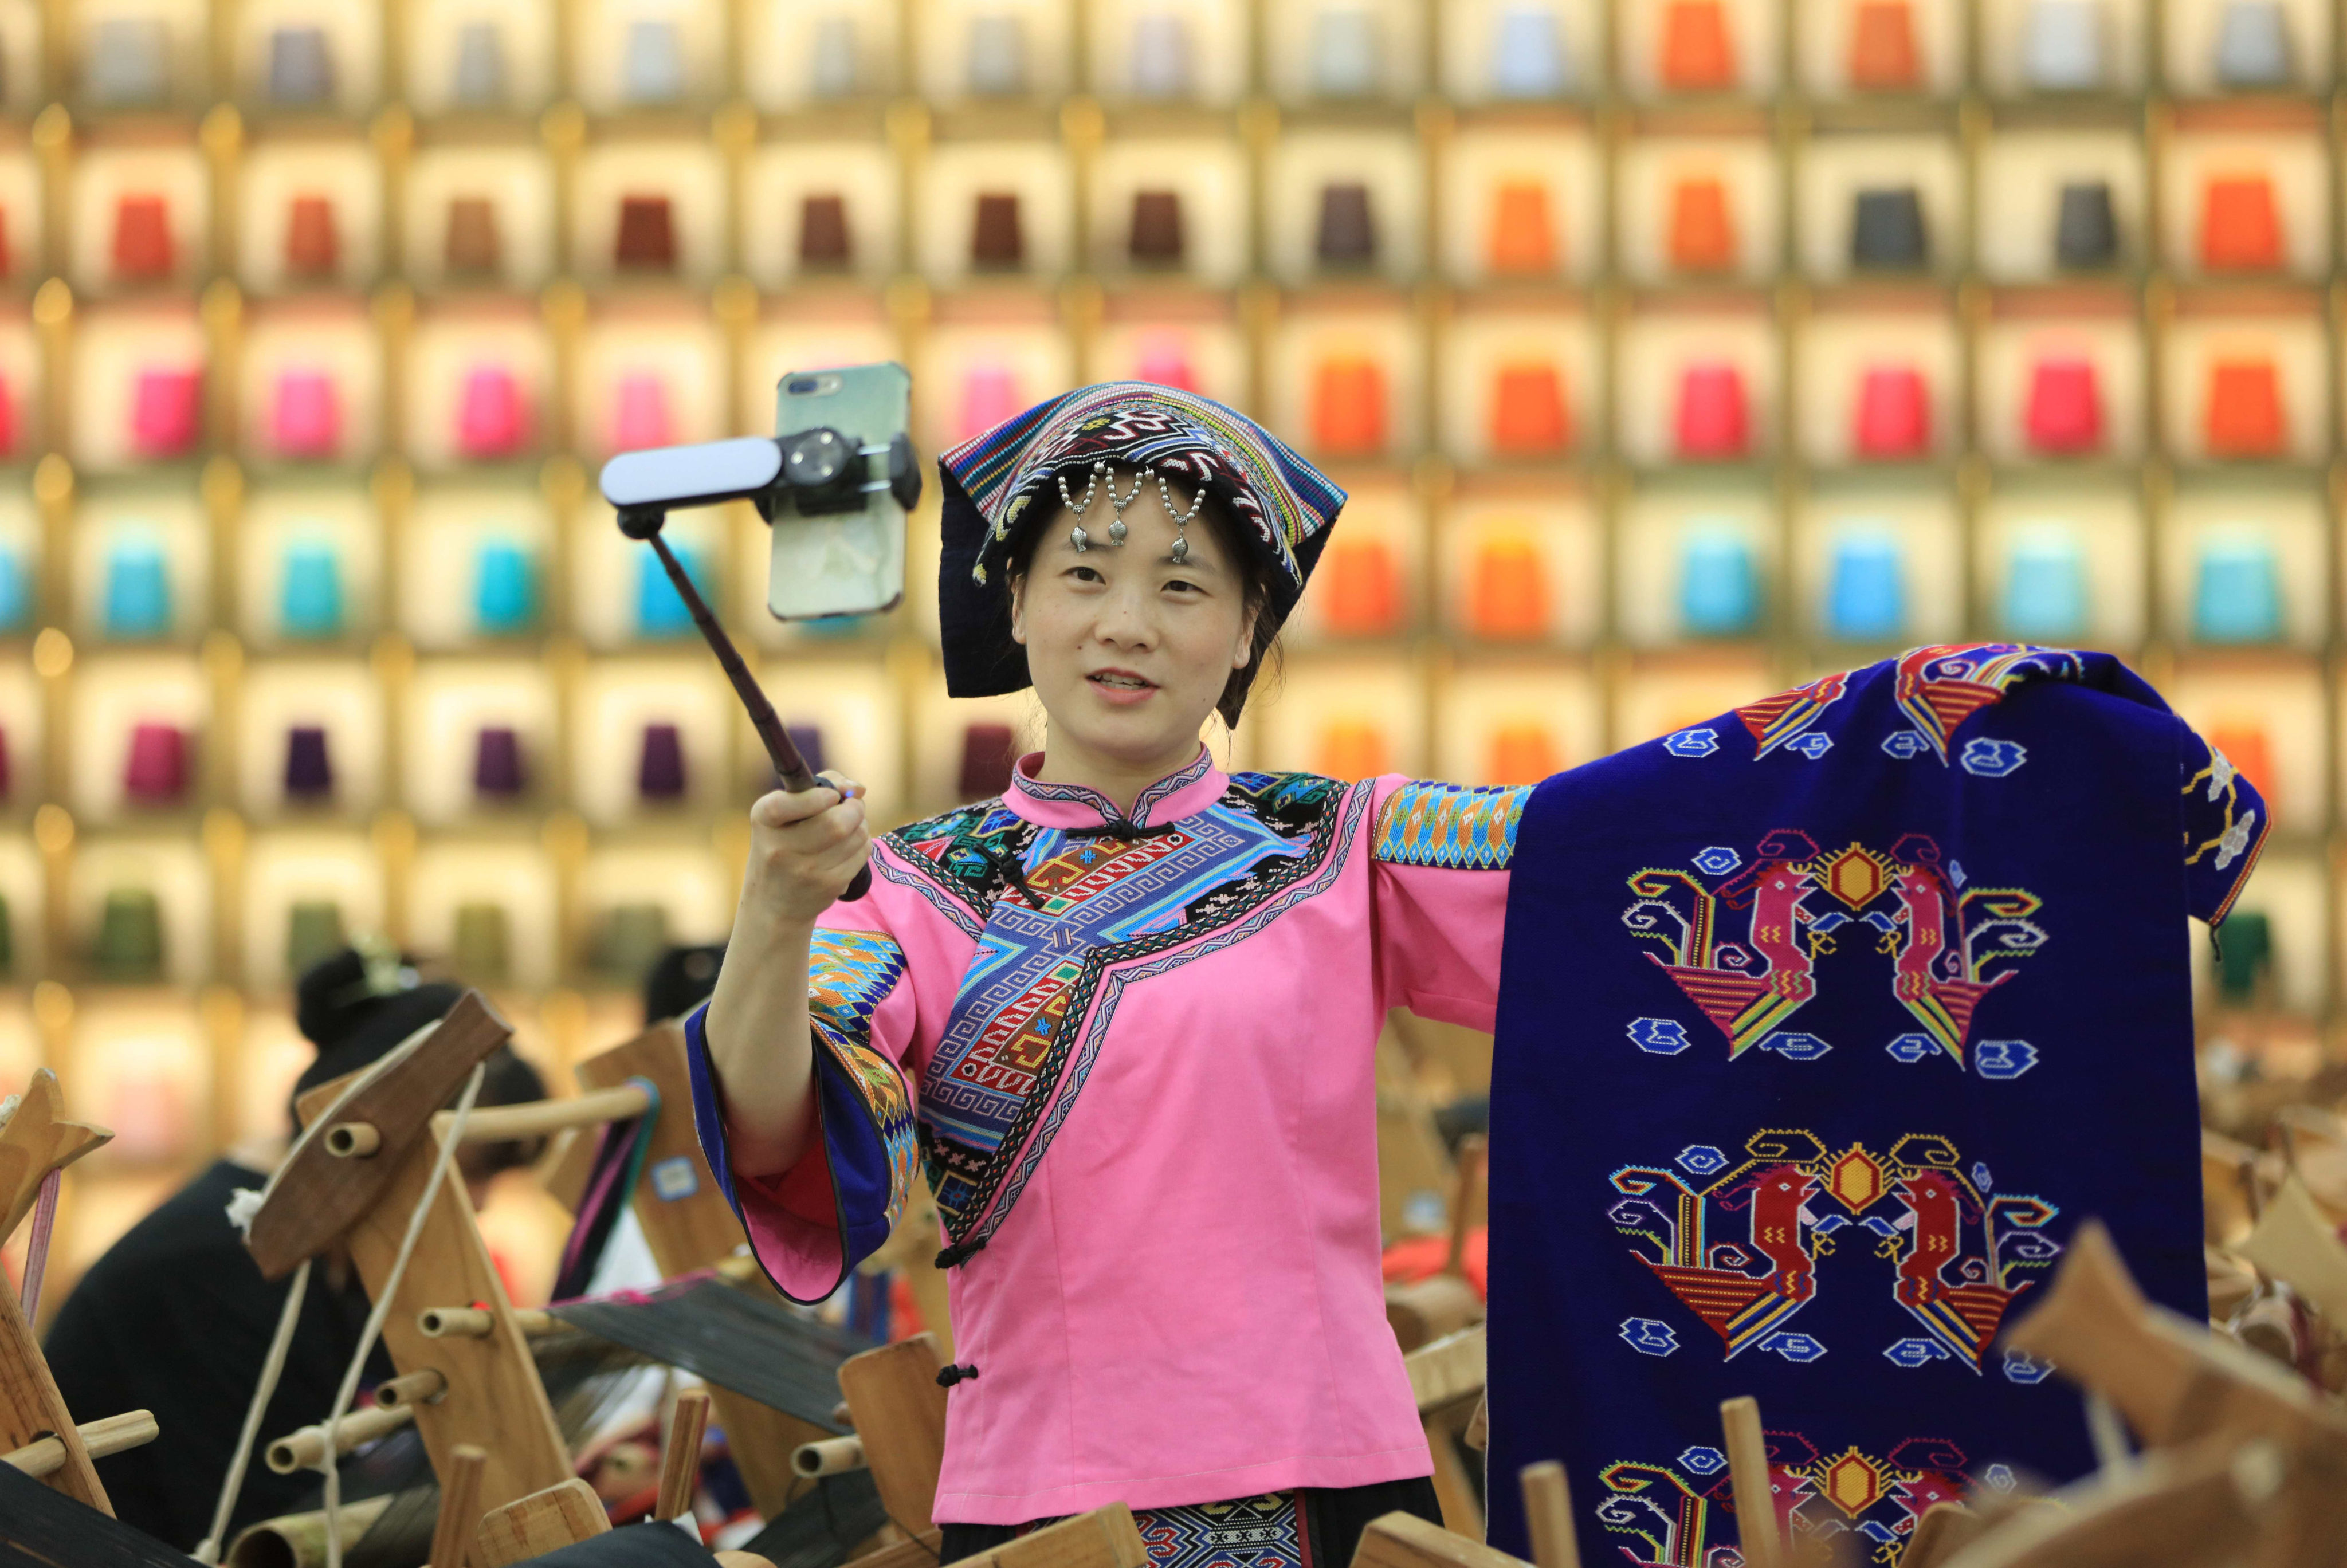 A woman promotes traditional tapestry weaving in a live stream. Tencent is betting big on live-streaming e-commerce through WeChat Channels, a video platform. Photo: Xinhua